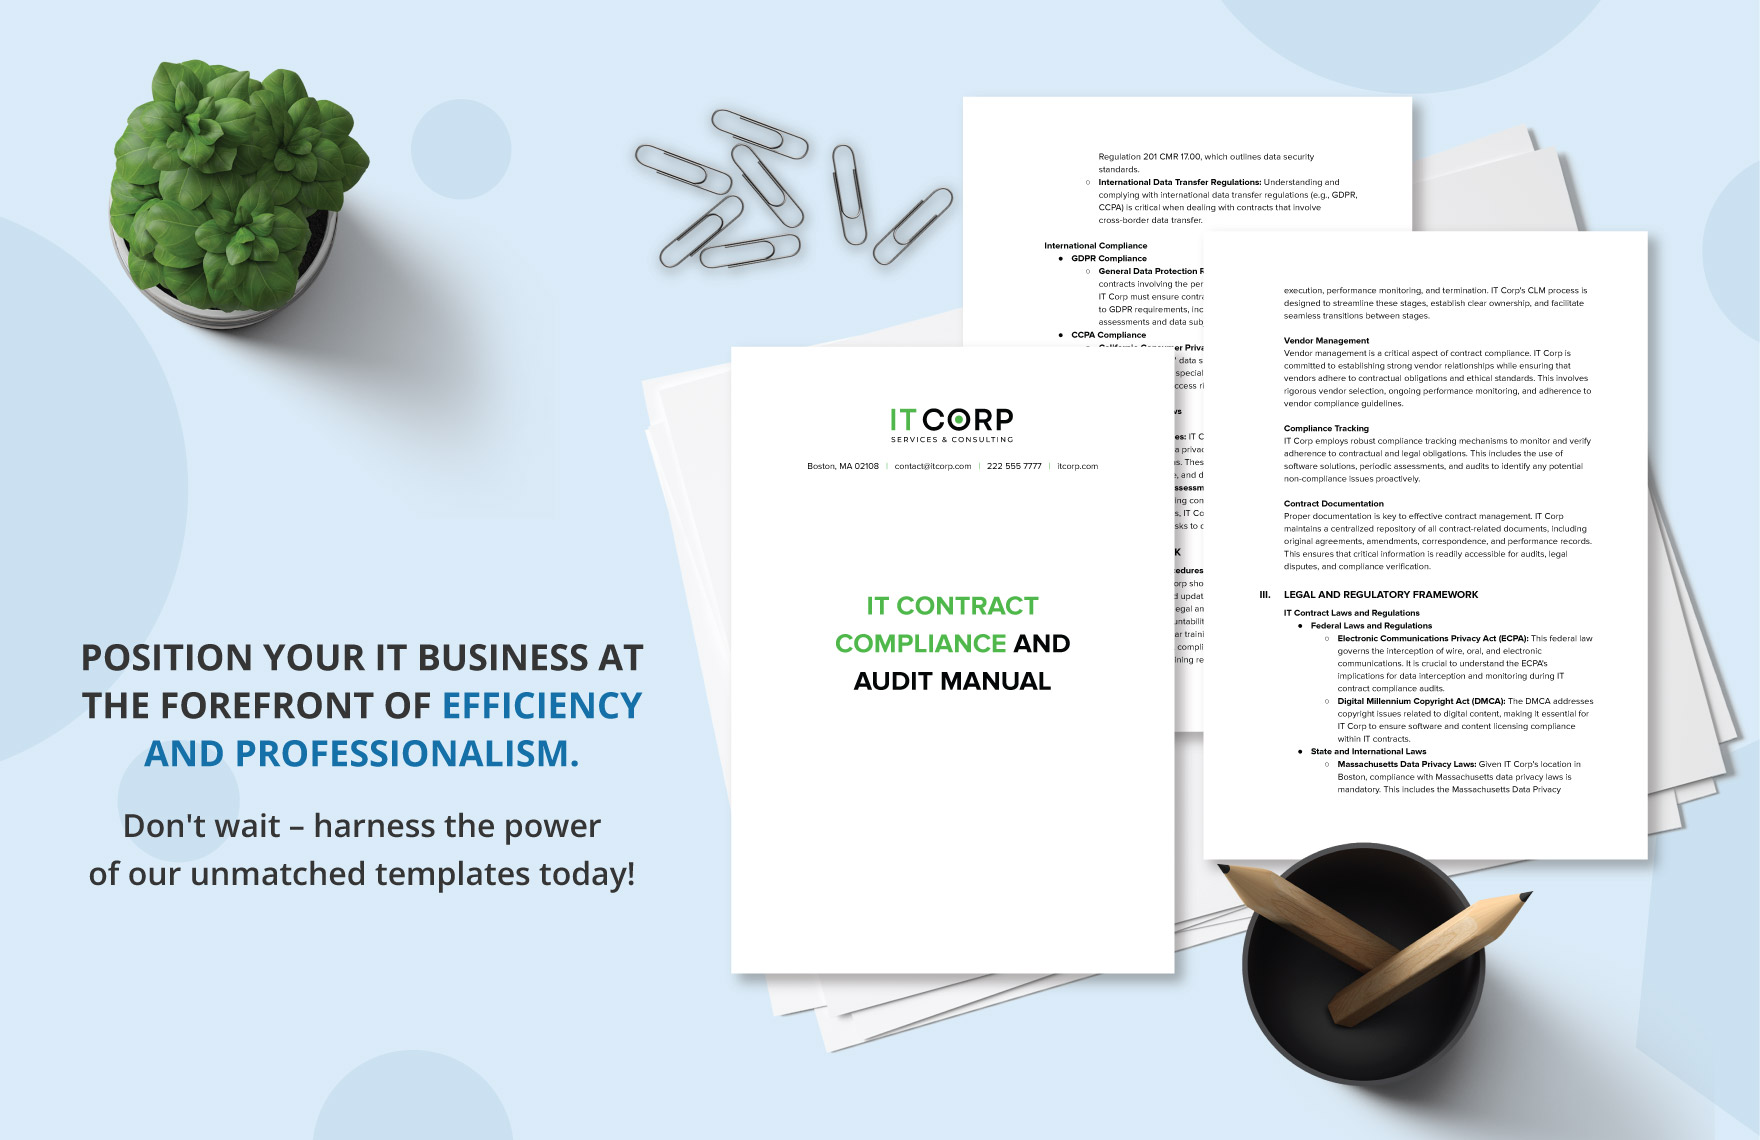 IT Contract Compliance and Audit Manual Template